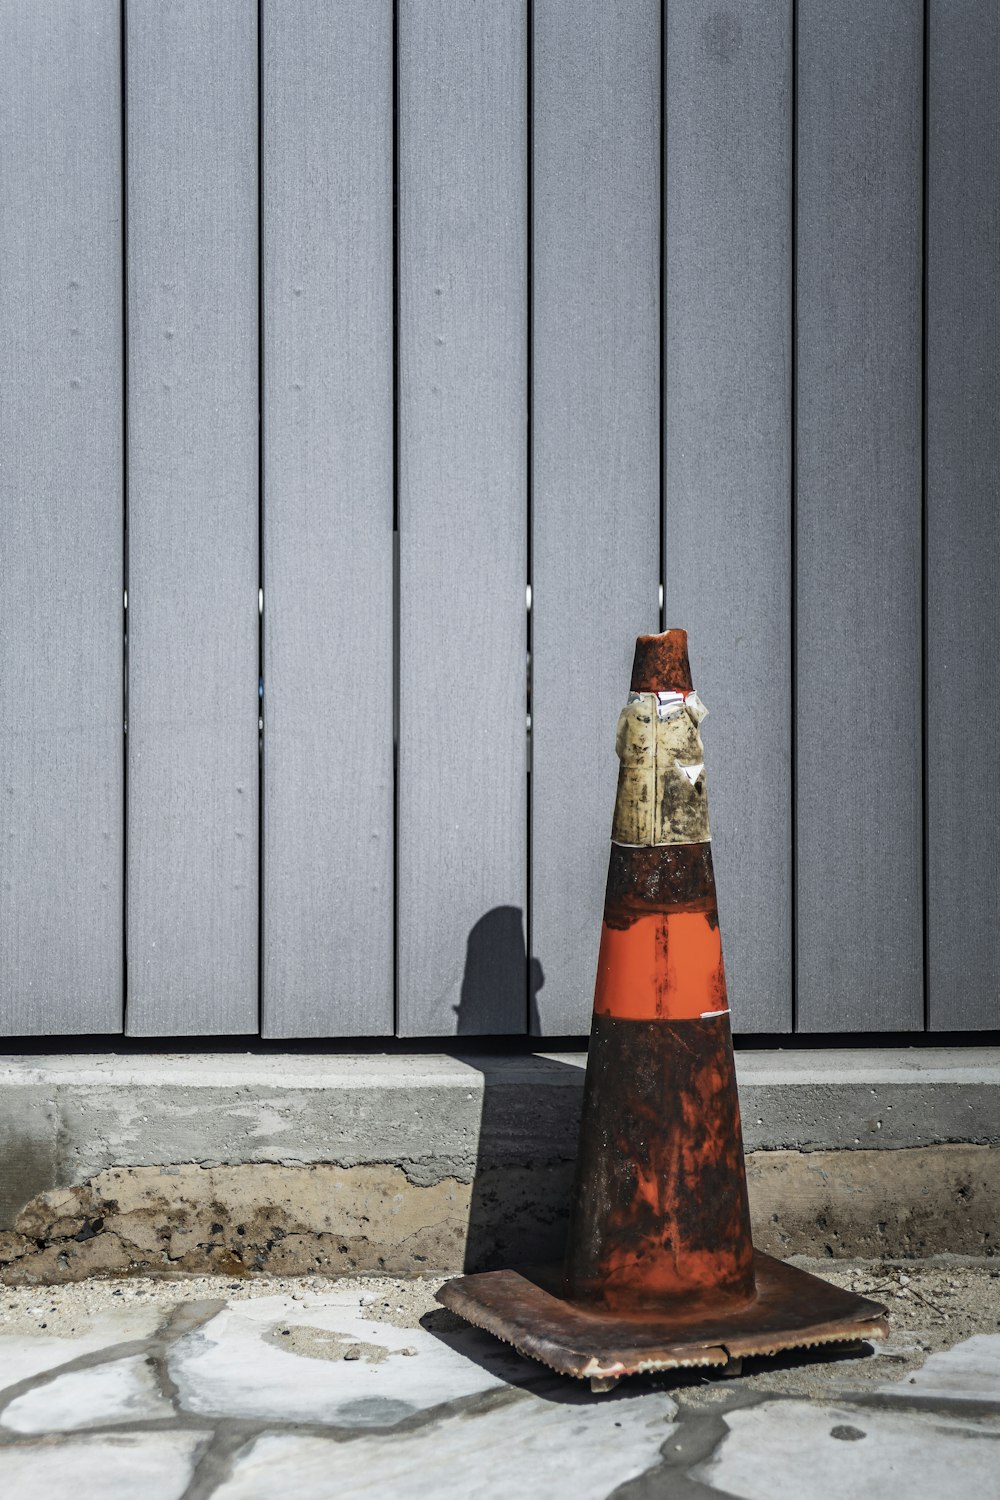 traffic cone beside wooden fence